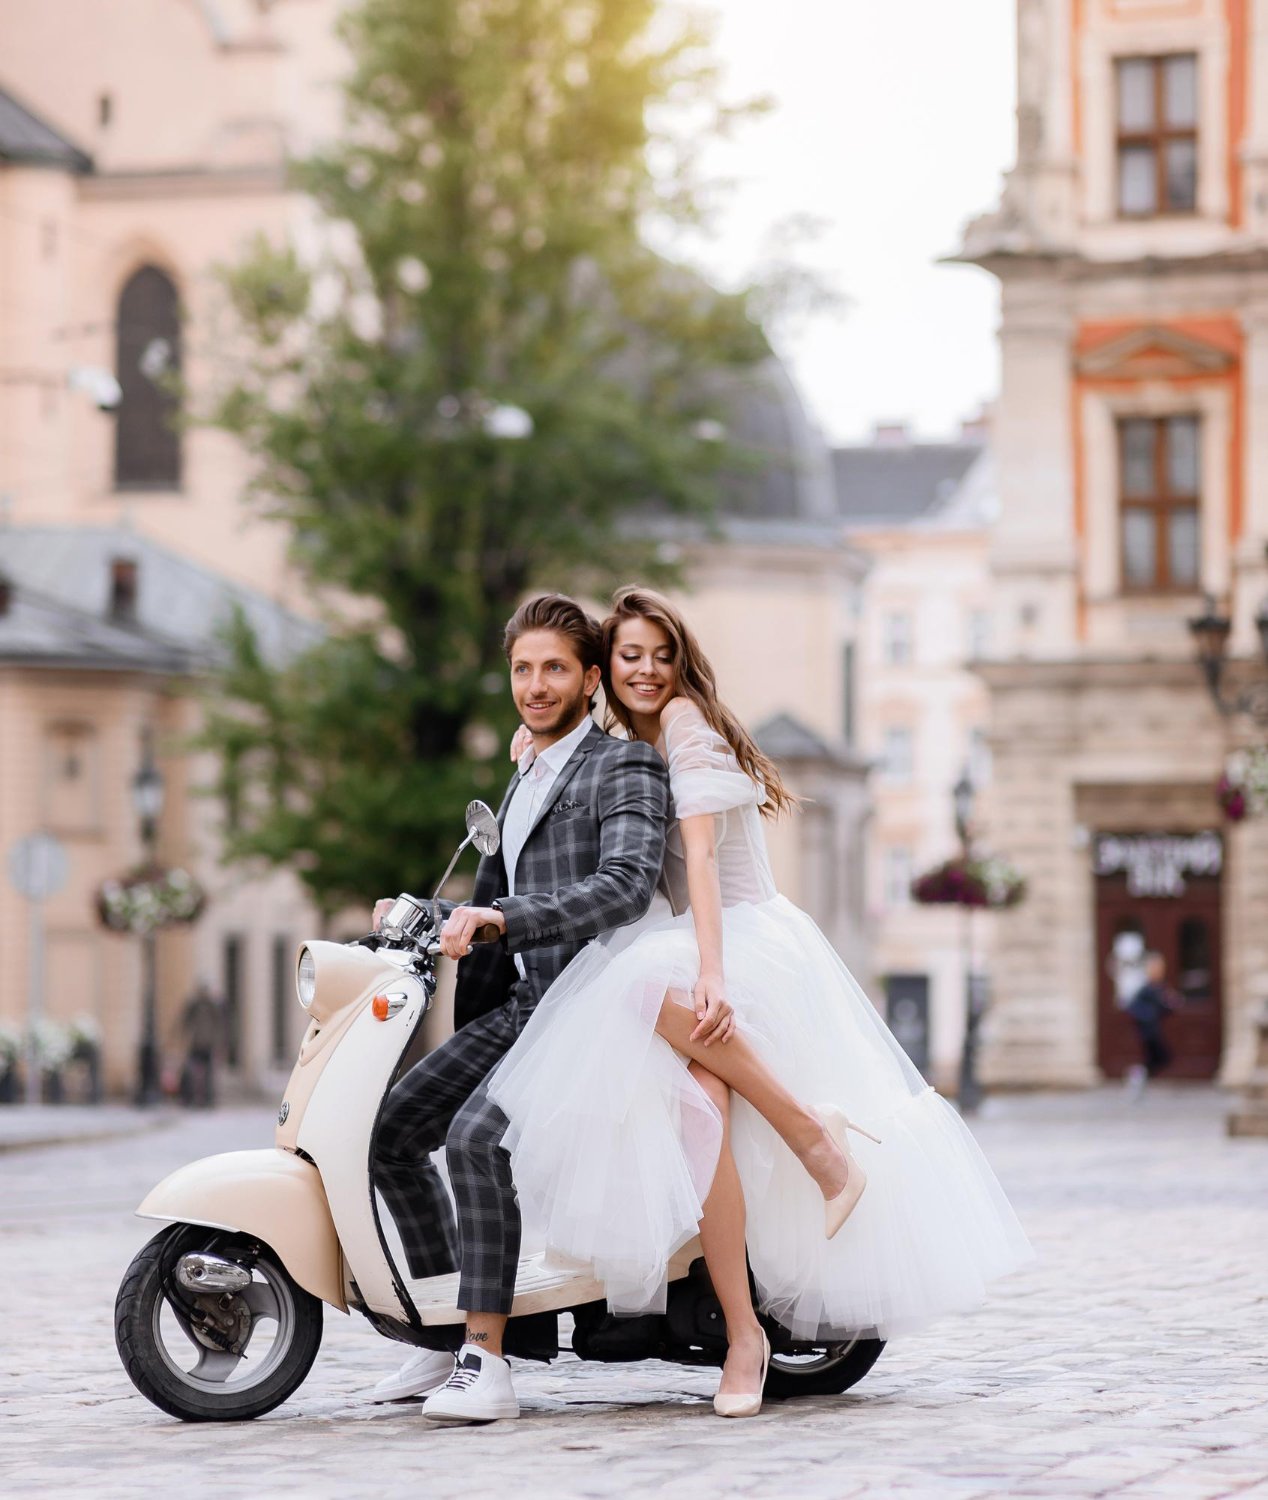 photo bride and groom posing on vintage motor scooter